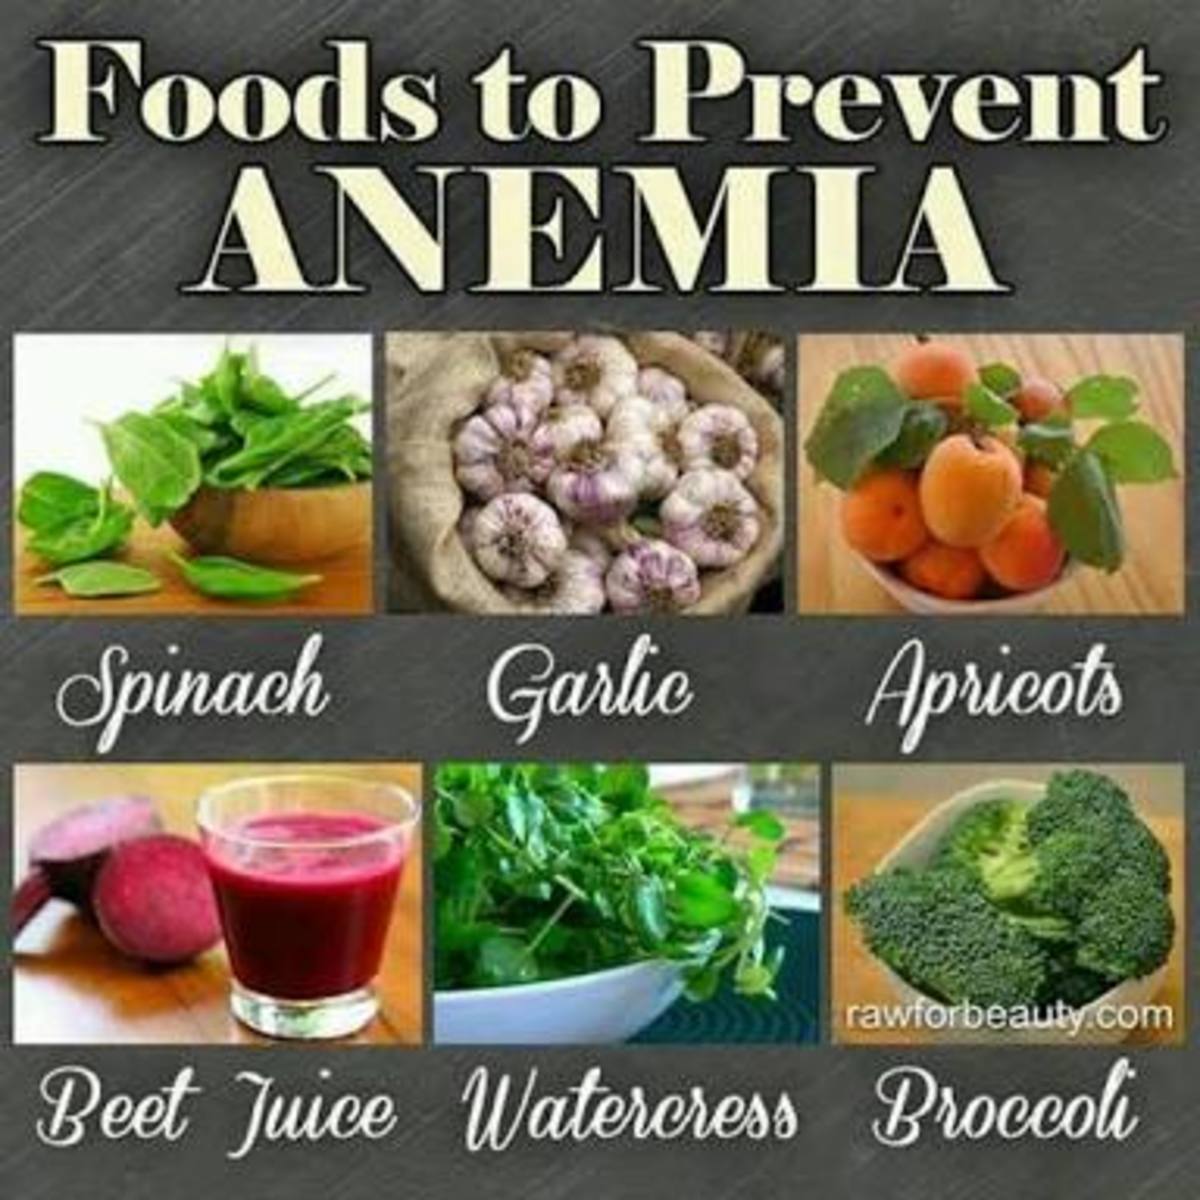 Foods to prevent anemia 